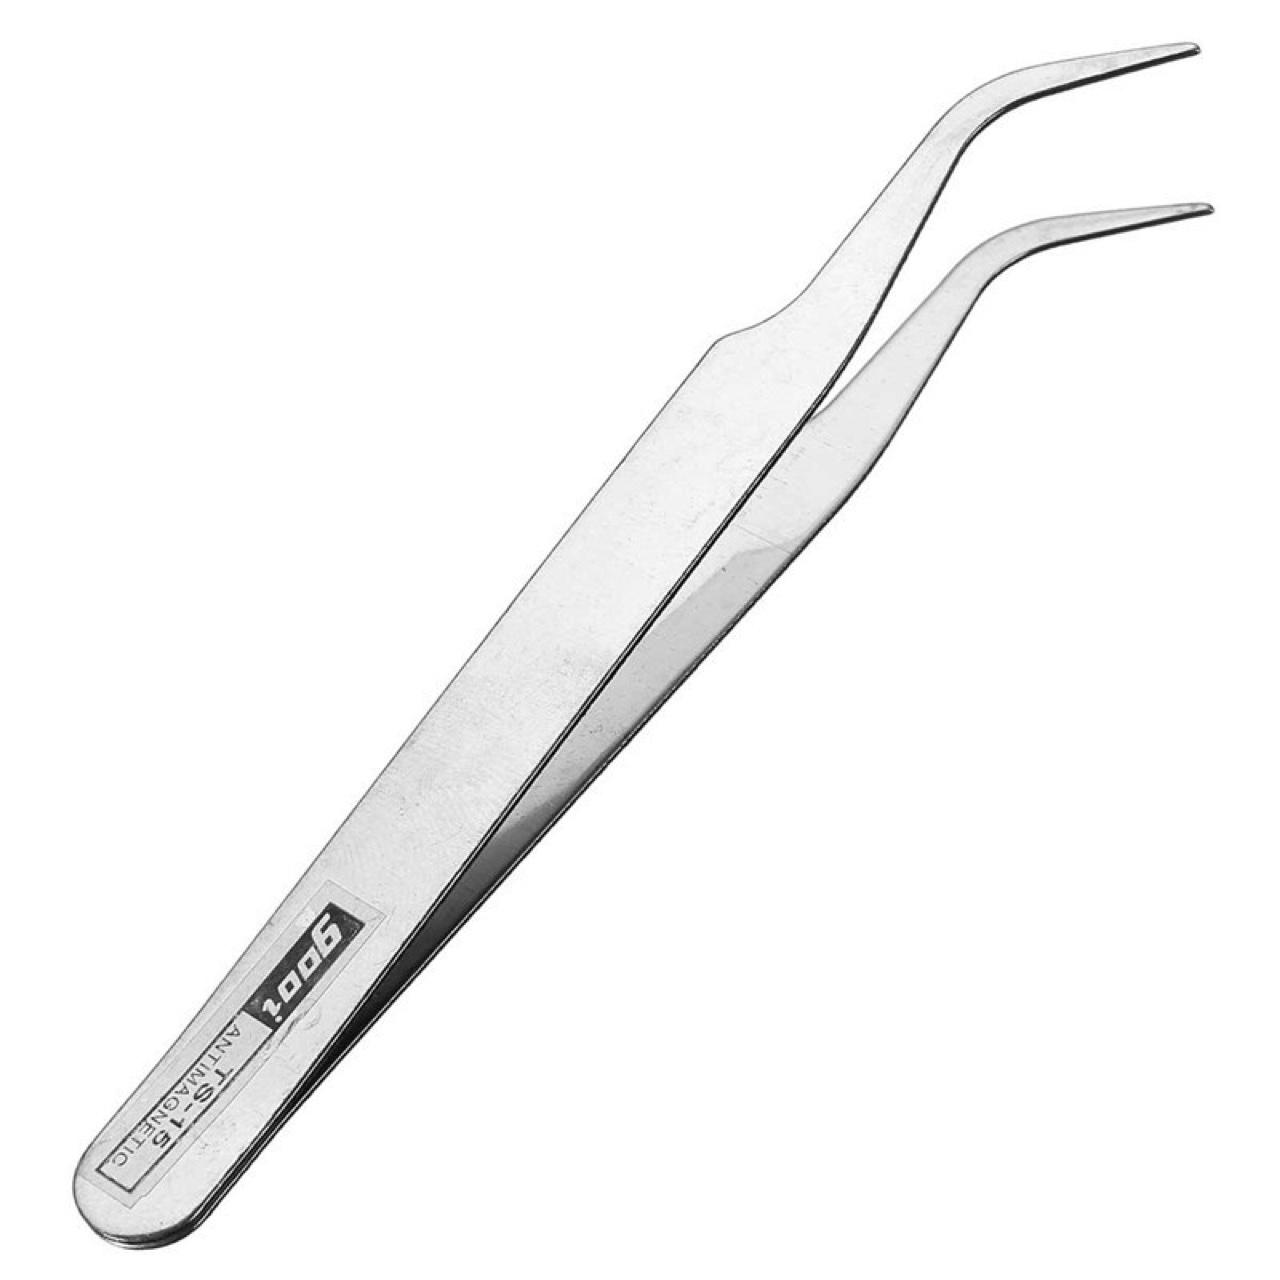 Anti-magnetic curved tweezers TS-15